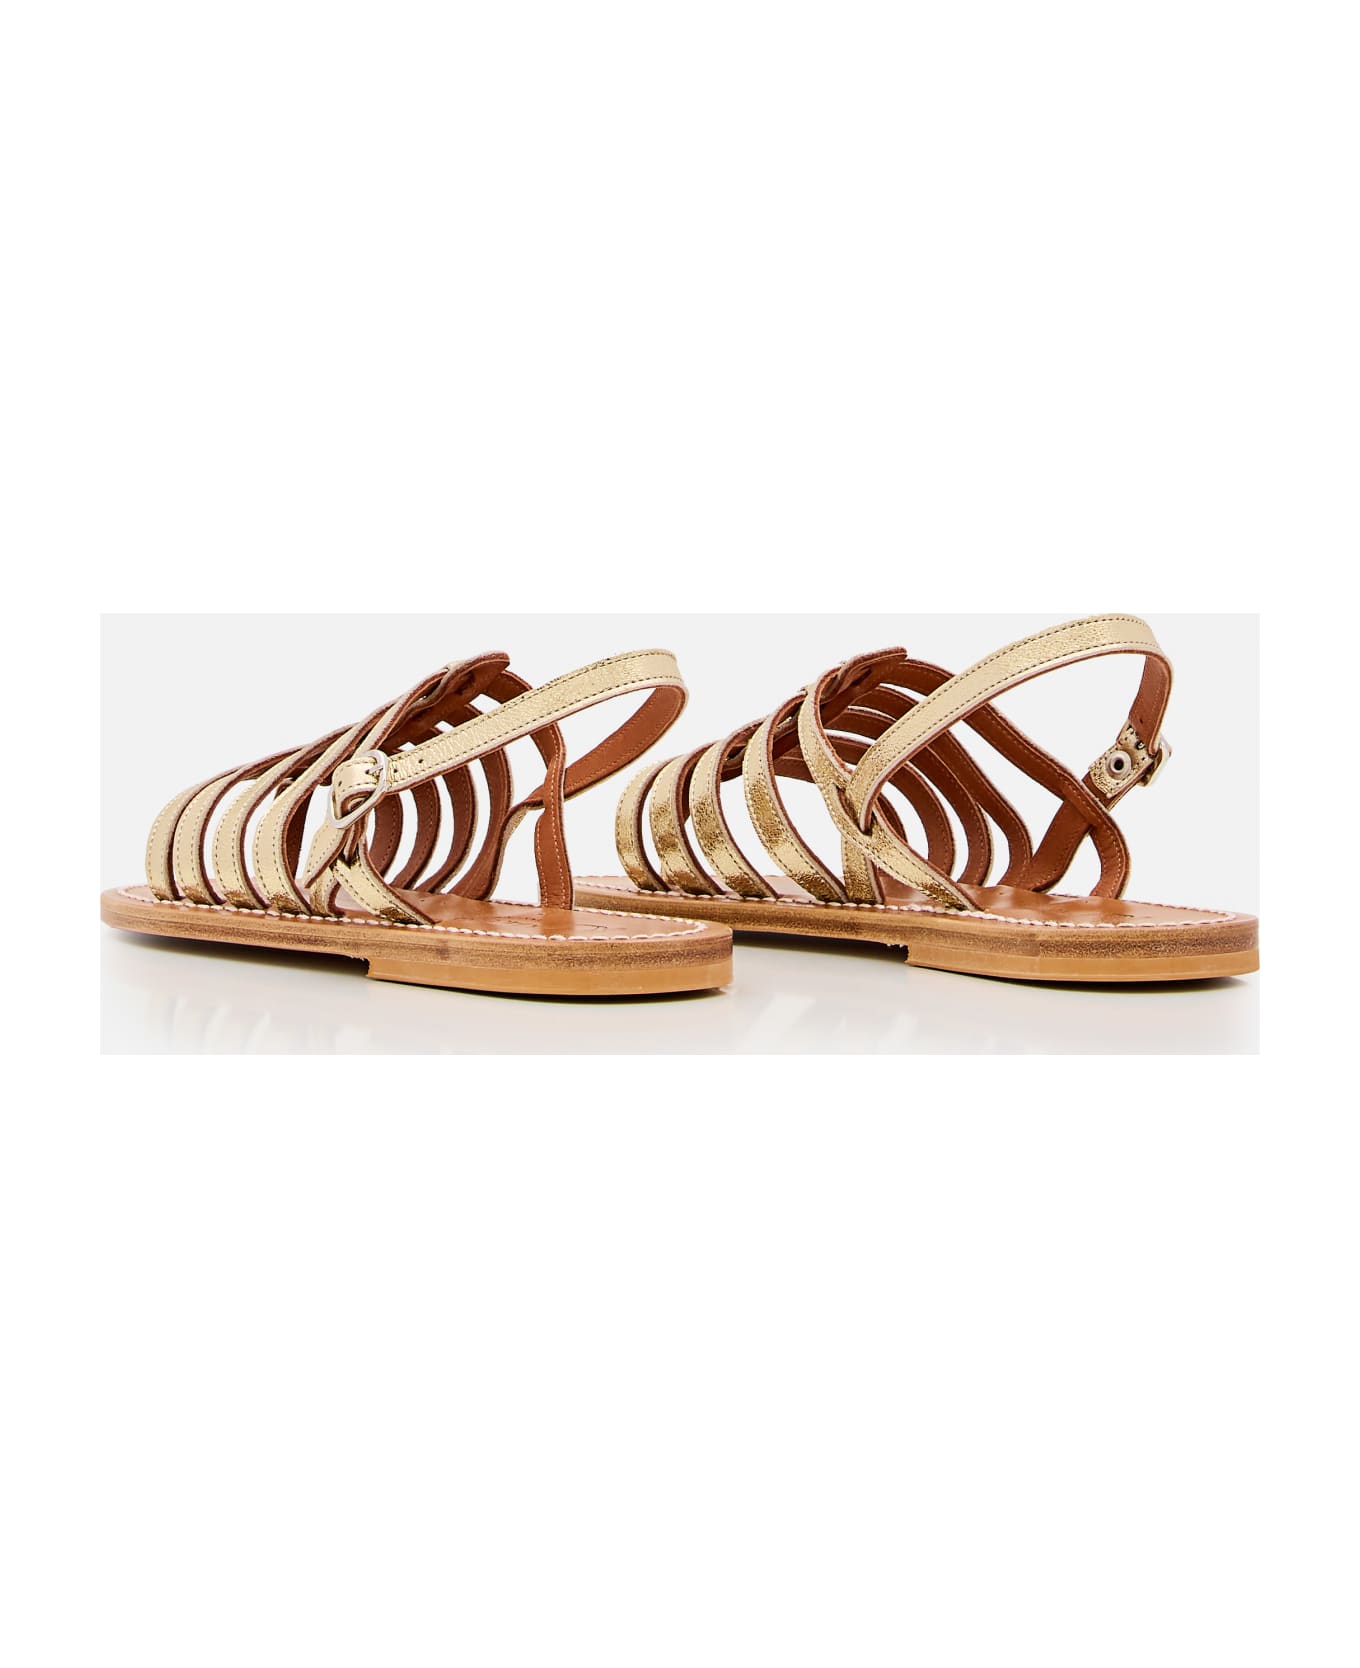 K.Jacques Homere Leather Sandals - Golden サンダル